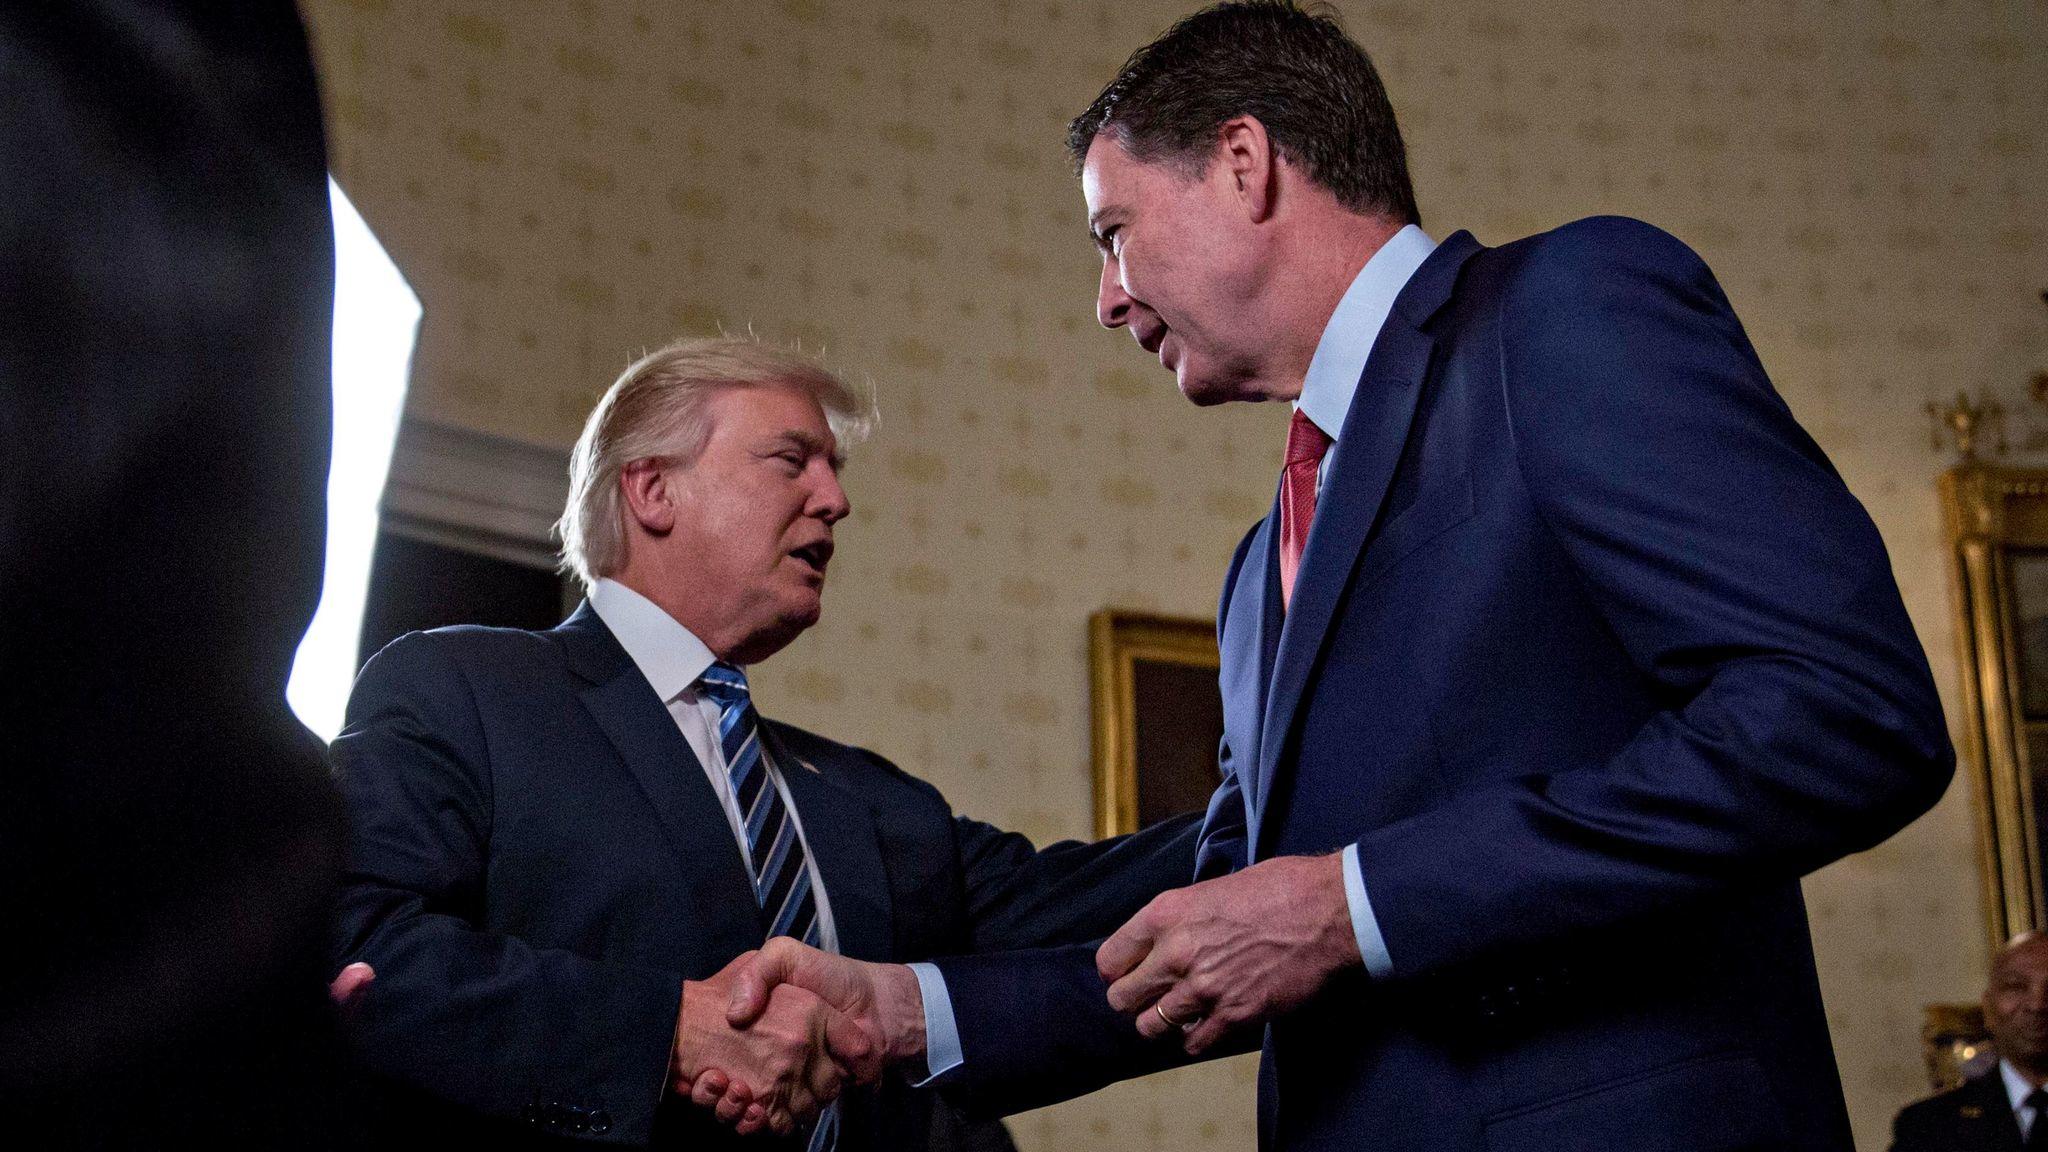 Trump and Comey at the White House on Jan. 22.